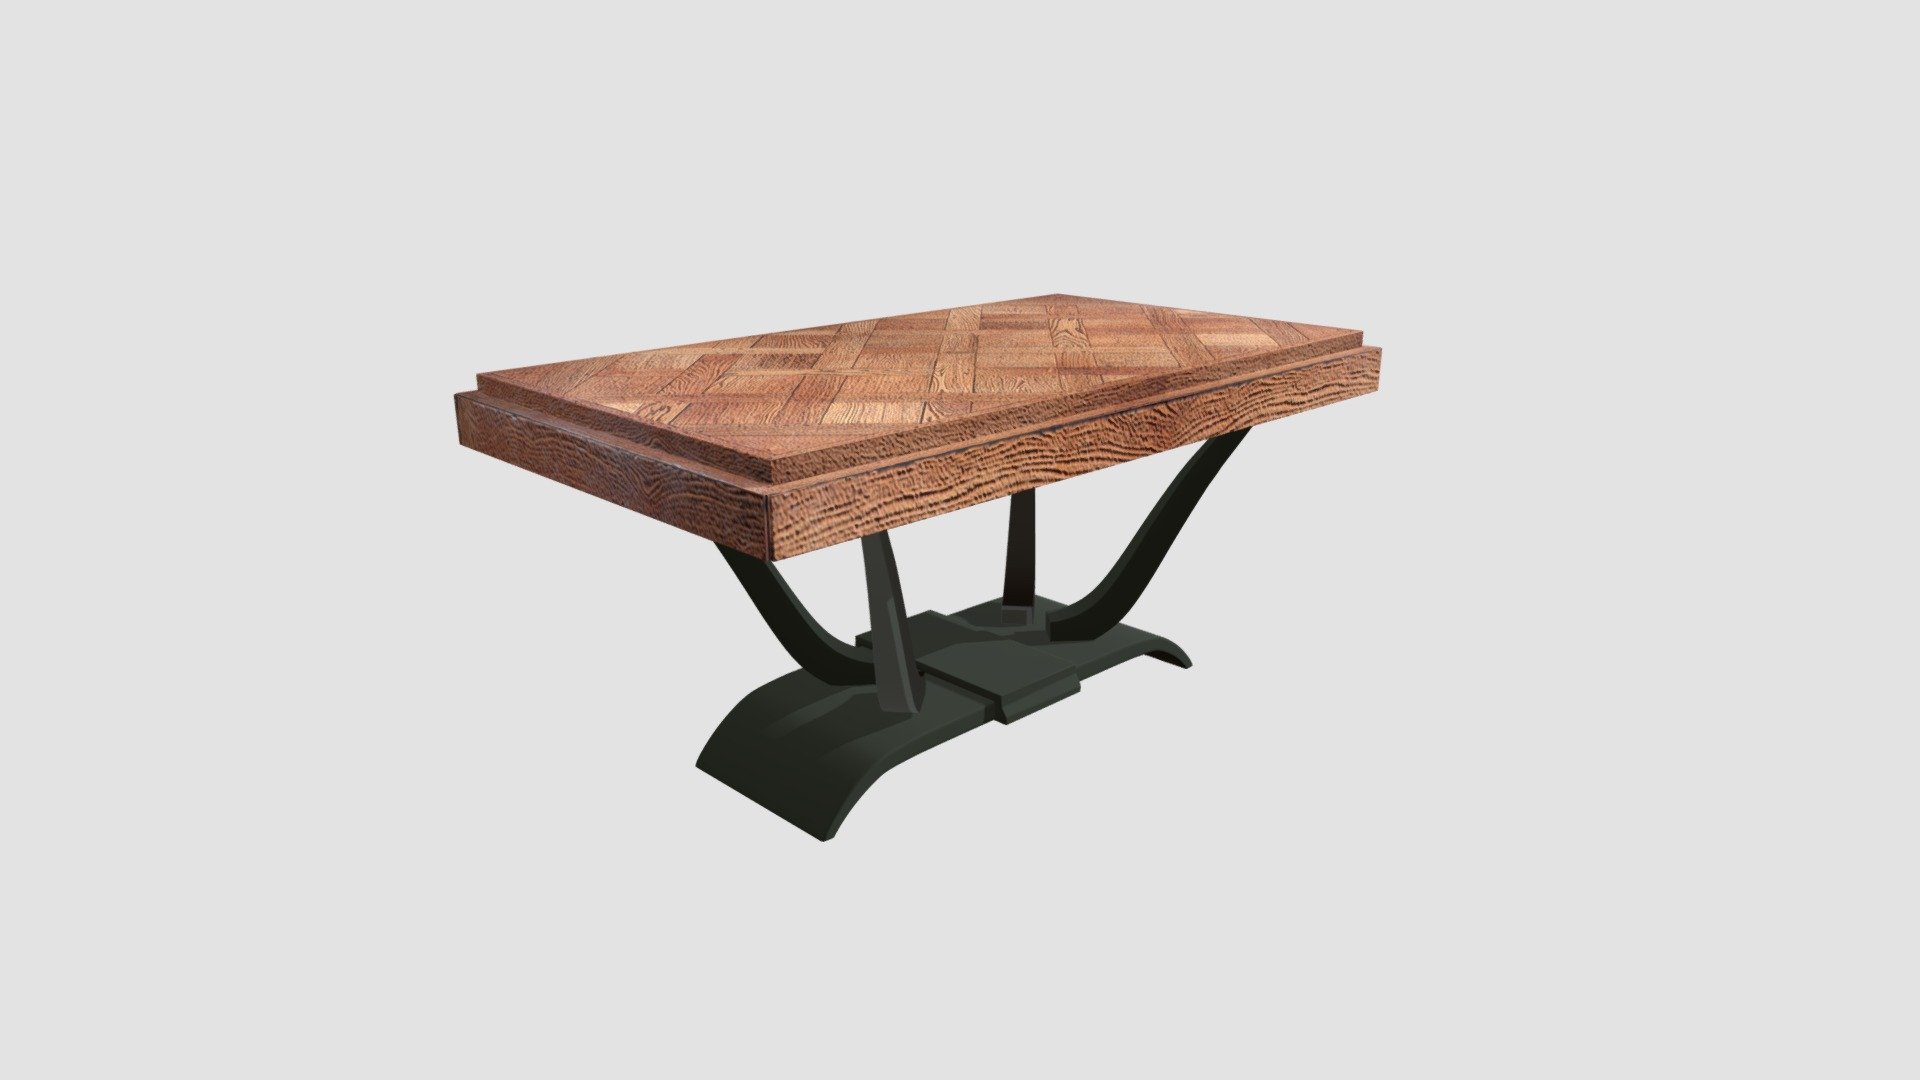 Highly detailed 3d model of table with all textures, shaders and materials. It is ready to use, just put it into your scene 3d model